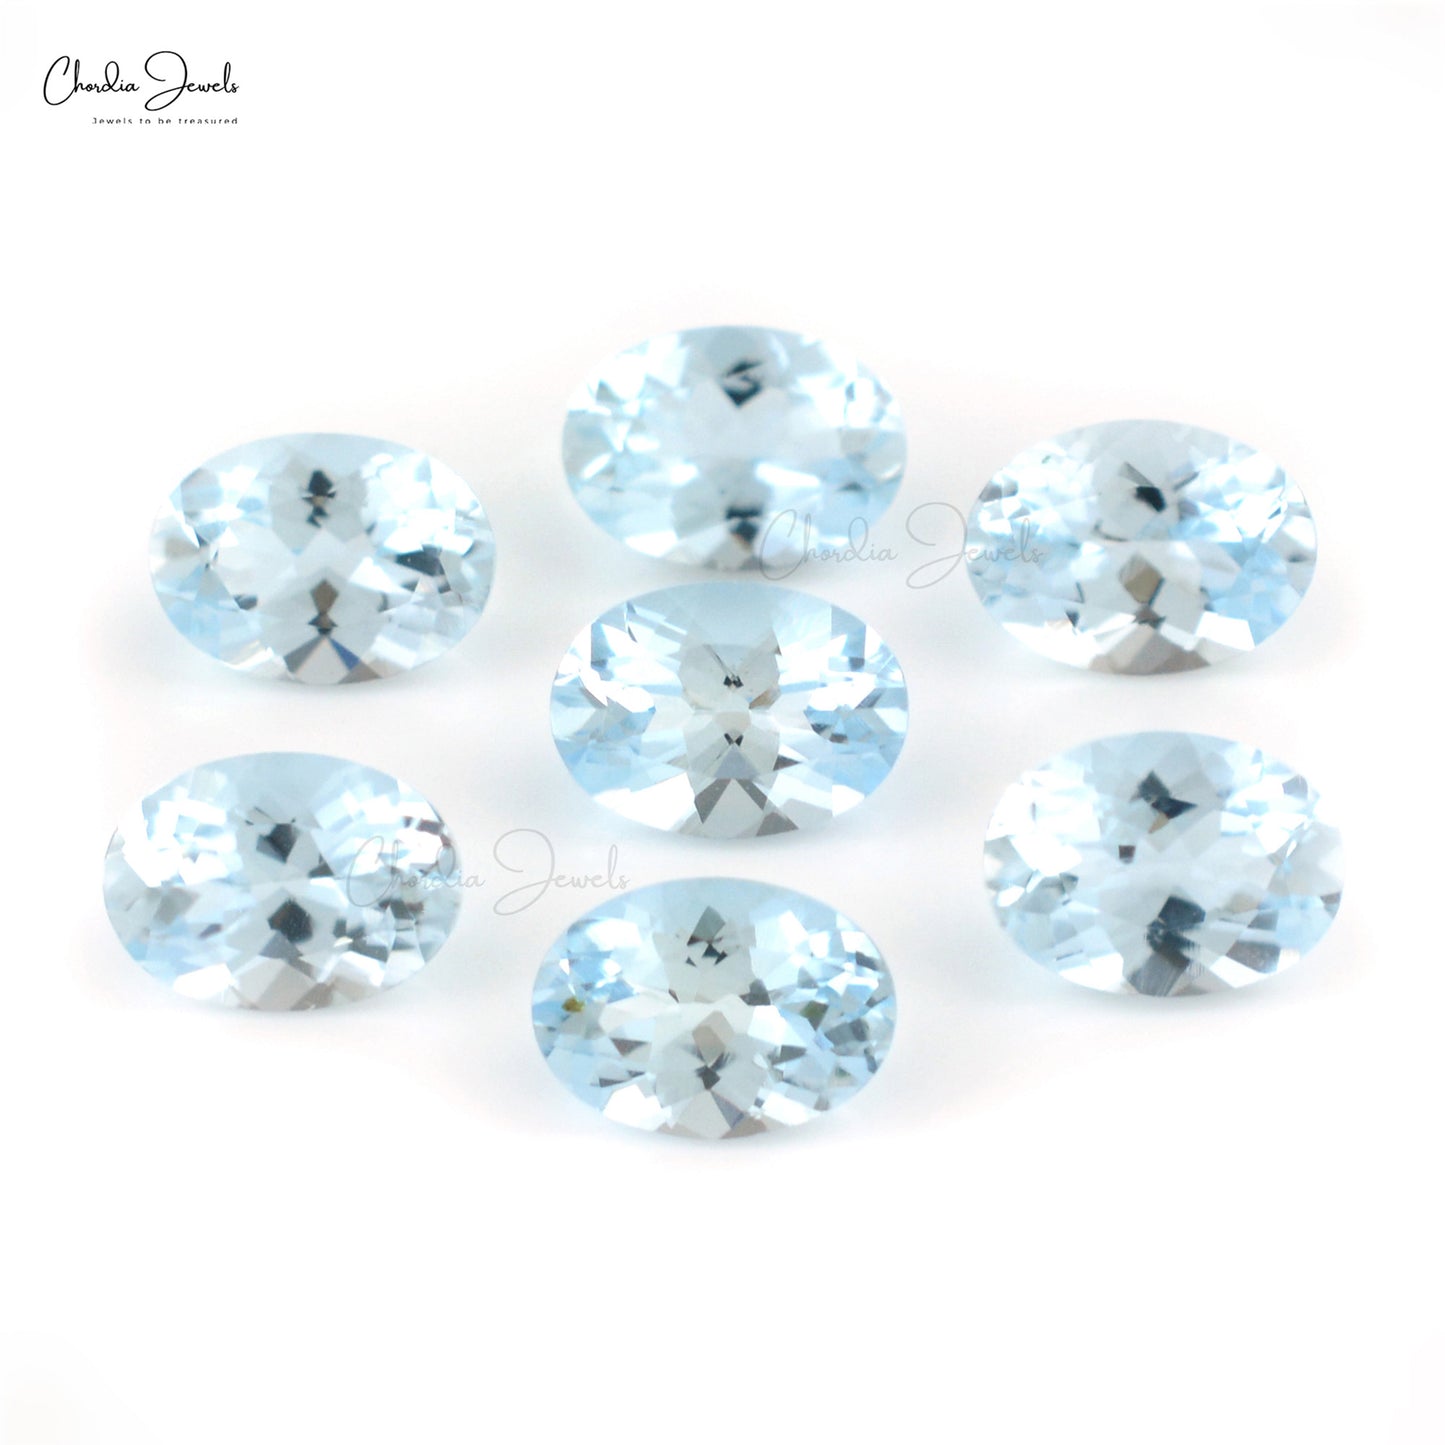 Load image into Gallery viewer, Loose Aquamarine Stones for sale
